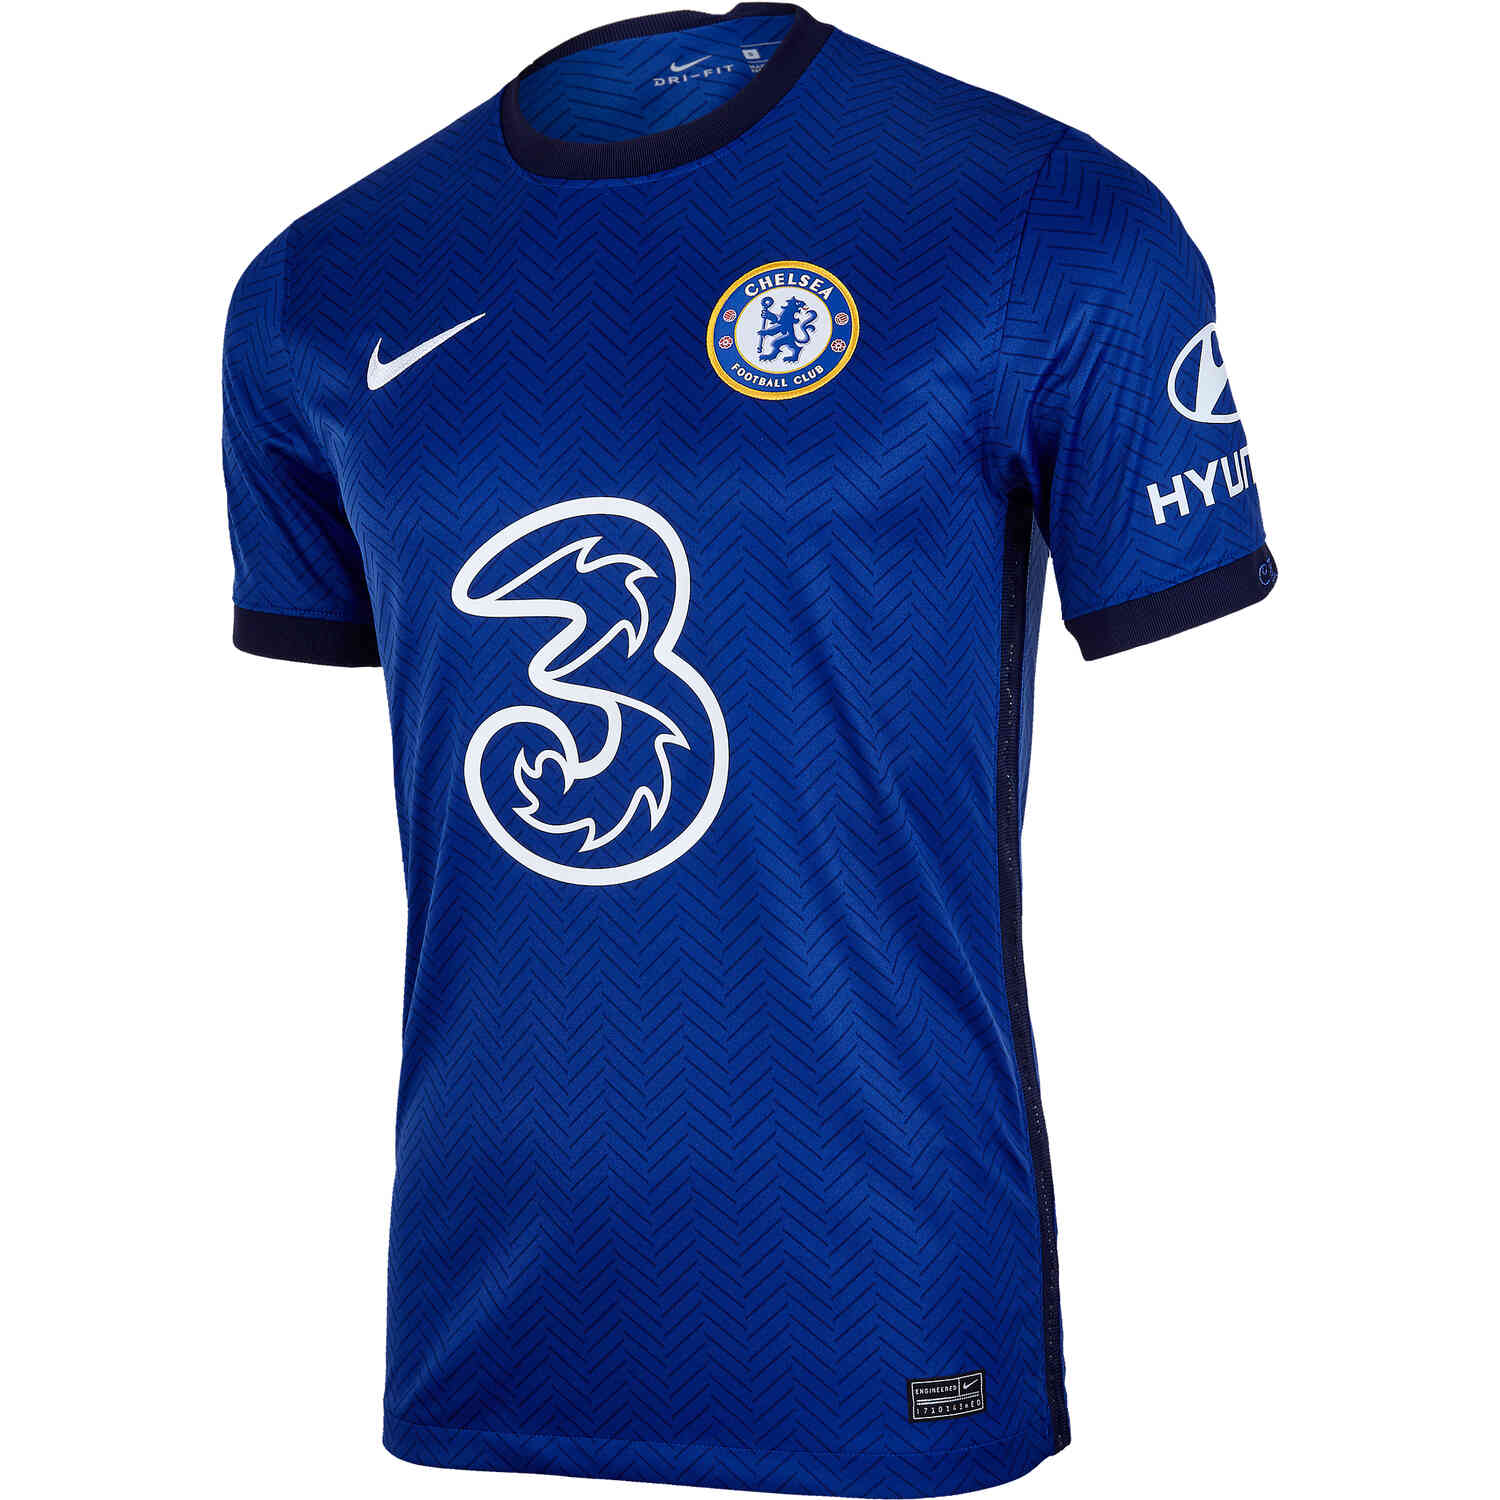 2020/21 Kids Christian Pulisic Chelsea Home Jersey - Soccer Master